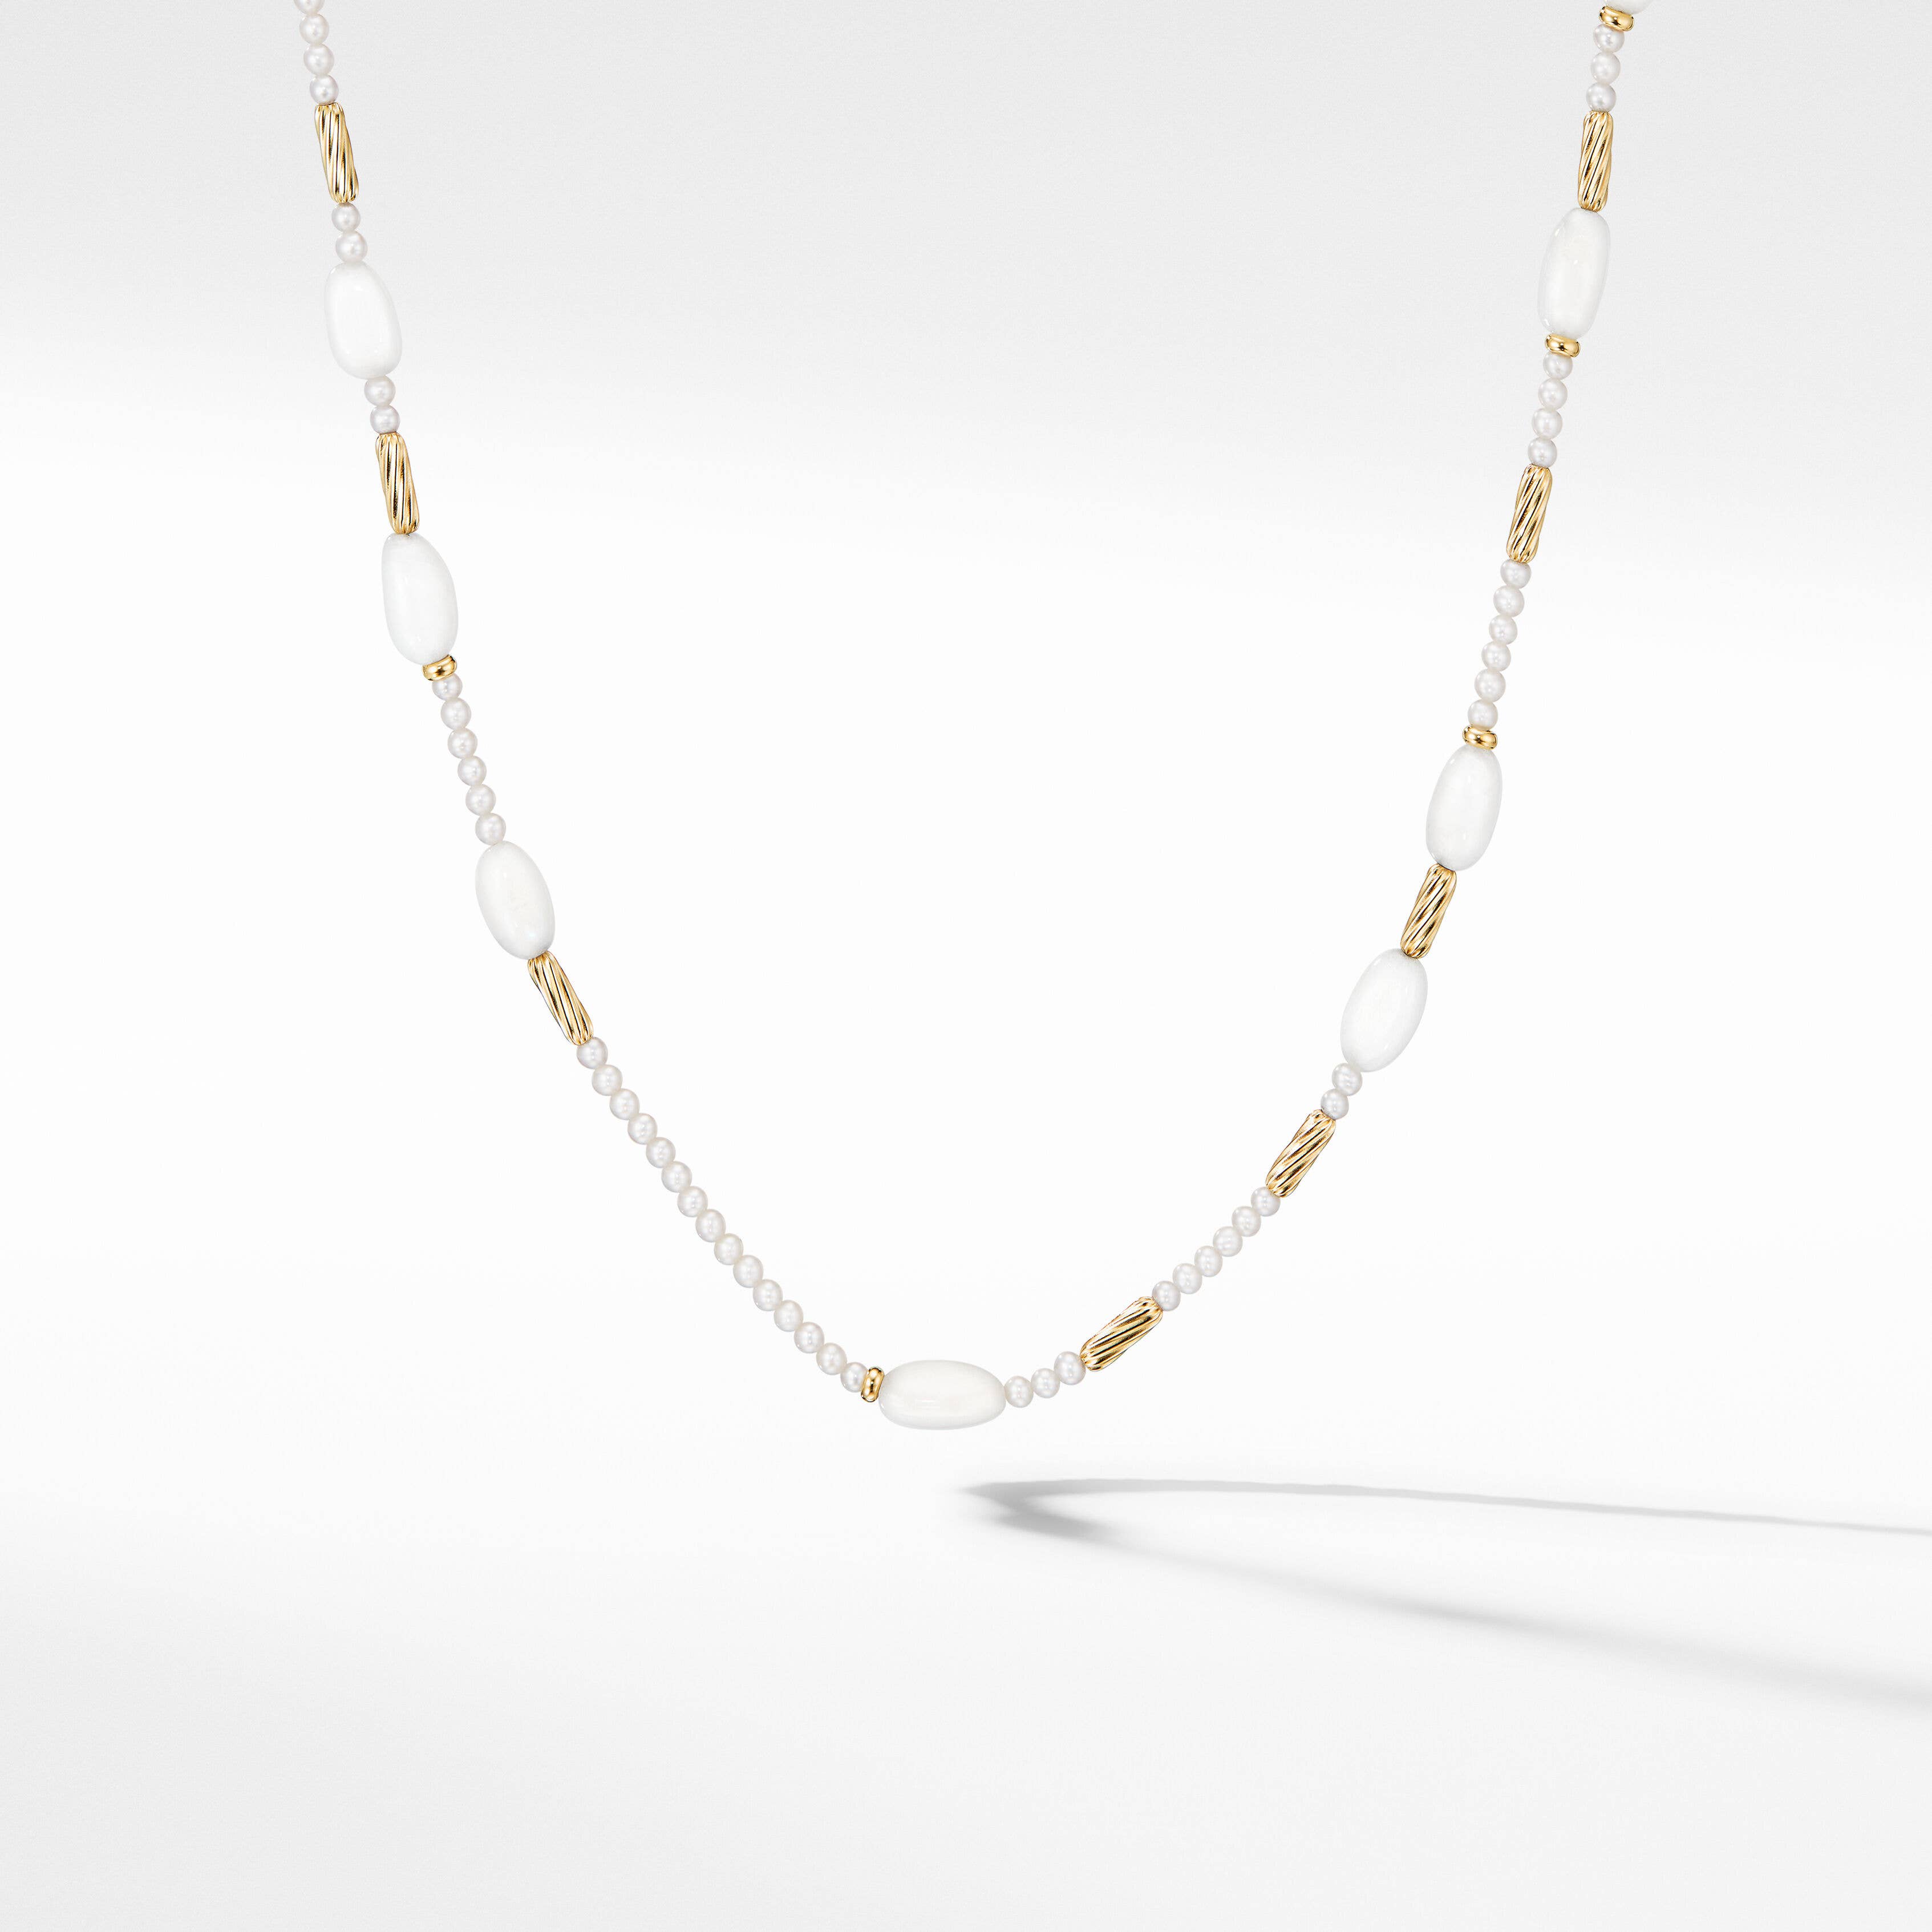 Tweejoux Necklace with Pearls, Rainbow Moonstone and 18K Yellow Gold